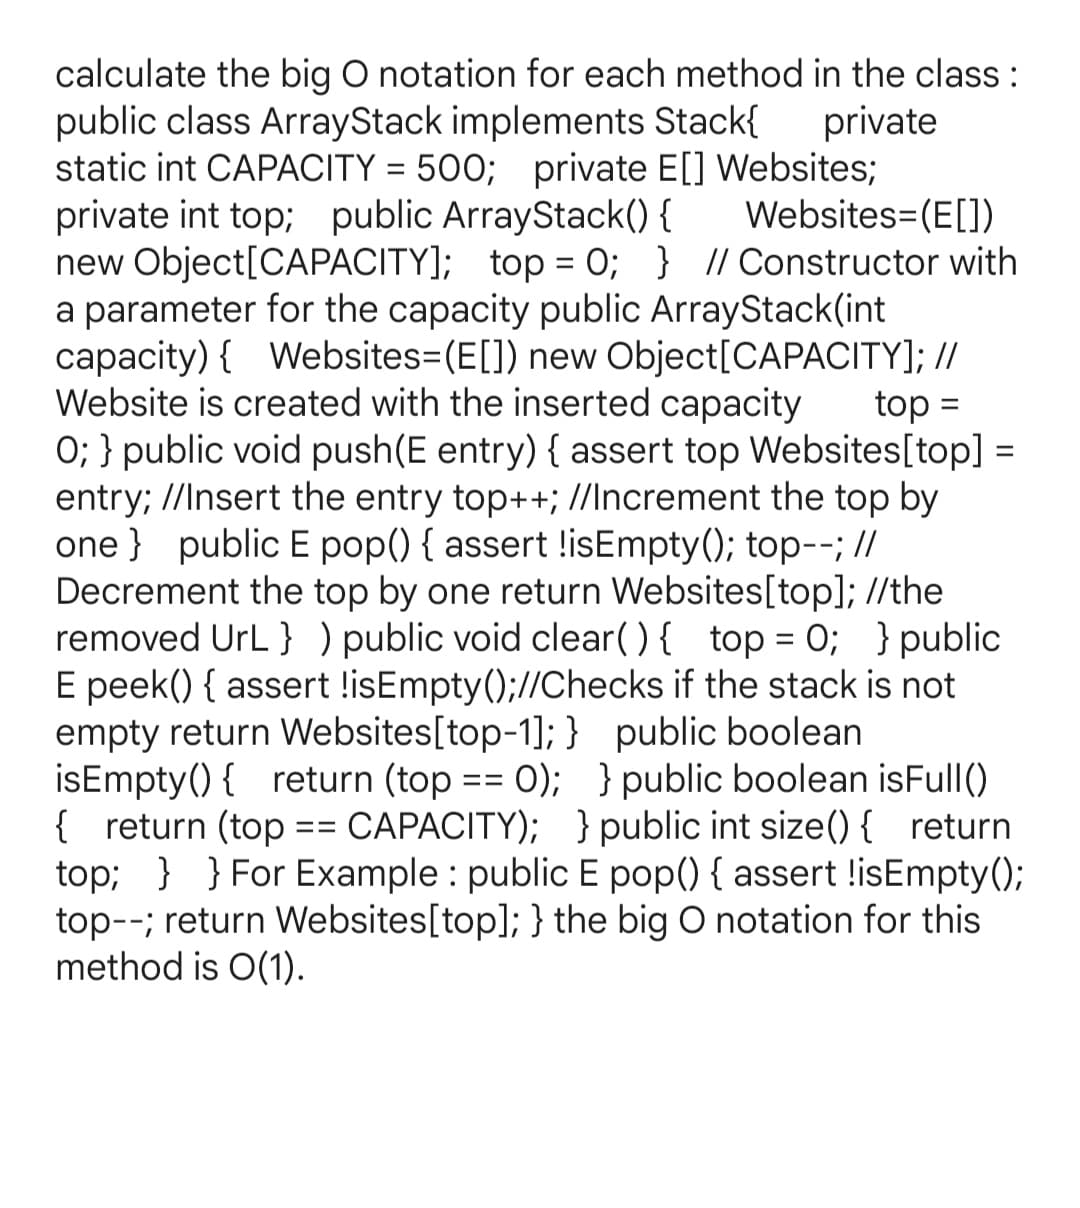 calculate the big O notation for each method in the class :
public class ArrayStack implements Stack{
static int CAPACITY
private
500; private E[] Websites;
Websites=(E[])
private int top; public ArrayStack() {
new Object[CAPACITY]; top = 0; } // Constructor with
a parameter for the capacity public ArrayStack(int
capacity) { Websites=(E[]) new Object[CAPACITY]; //
Website is created with the inserted capacity
0; } public void push(E entry) { assert top Websites[top] =
entry; //Insert the entry top++; //Increment the top by
one } public E pop() { assert !isEmpty(); top--; //
Decrement the top by one return Websites[top]; //the
removed UrL } ) public void clear() { top = 0; }public
E peek() { assert !isEmpty();//Checks if the stack is not
empty return Websites[top-1]; } public boolean
isEmpty() { return (top == 0); }public boolean isFull()
{ return (top == CAPACITY); }public int size(){ return
top; } } For Example : public E pop() { assert !isEmpty();
top--; return Websites[top]; } the big O notation for this
method is O(1).
top =
